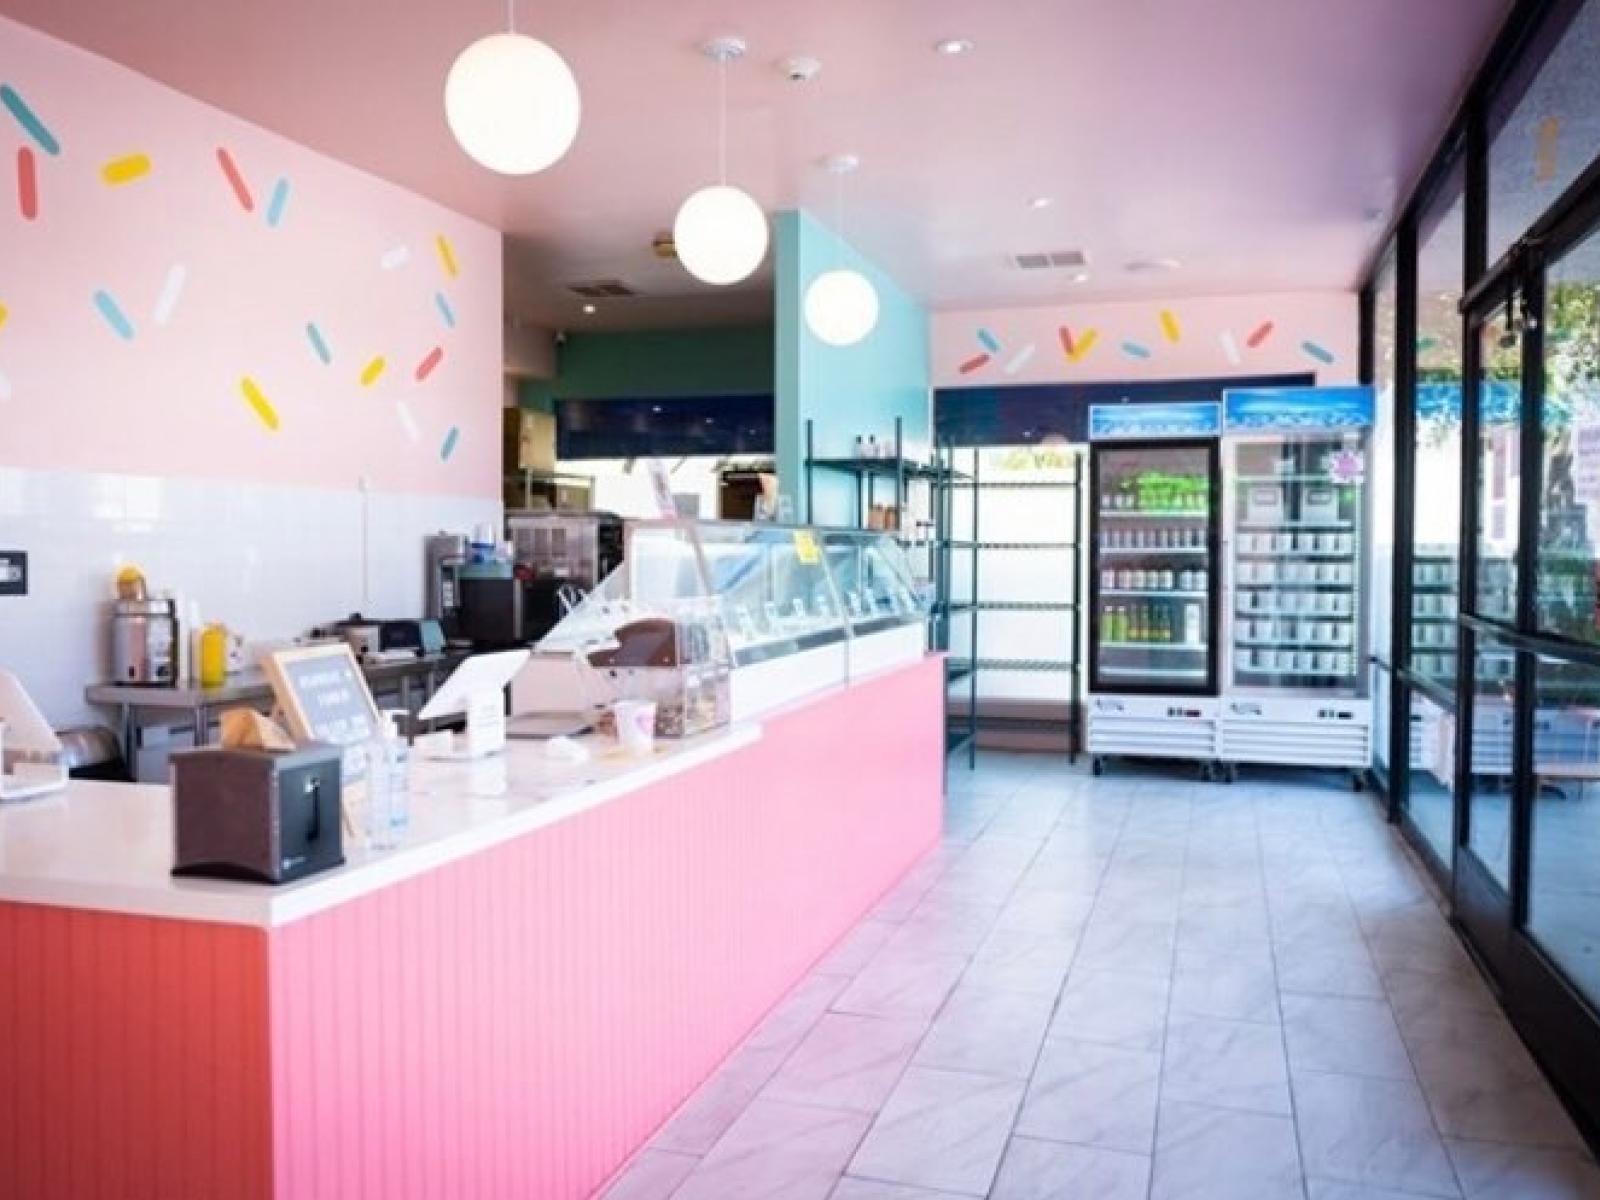 Main image for business titled Cocobella Creamery